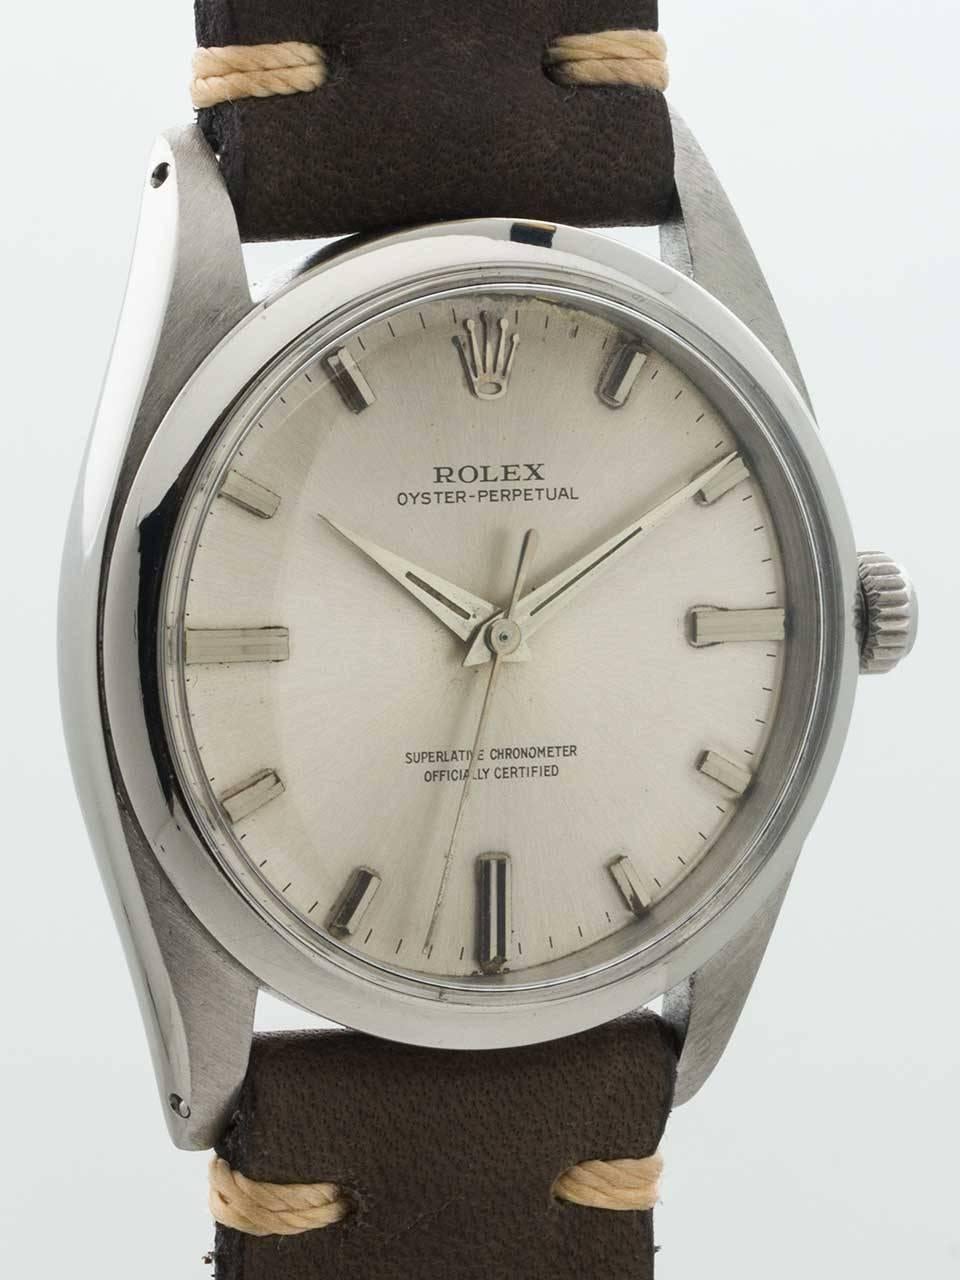 Rolex Stainless Steel Oyster Perpetual Wristwatch ref 1018 serial number 853,xxx circa 1962. Scarce 36mm model, same size as popular ref 1016 Explorer 1. With smooth bezel and acrylic crystal. Original silvered satin dial with applied silver indexes